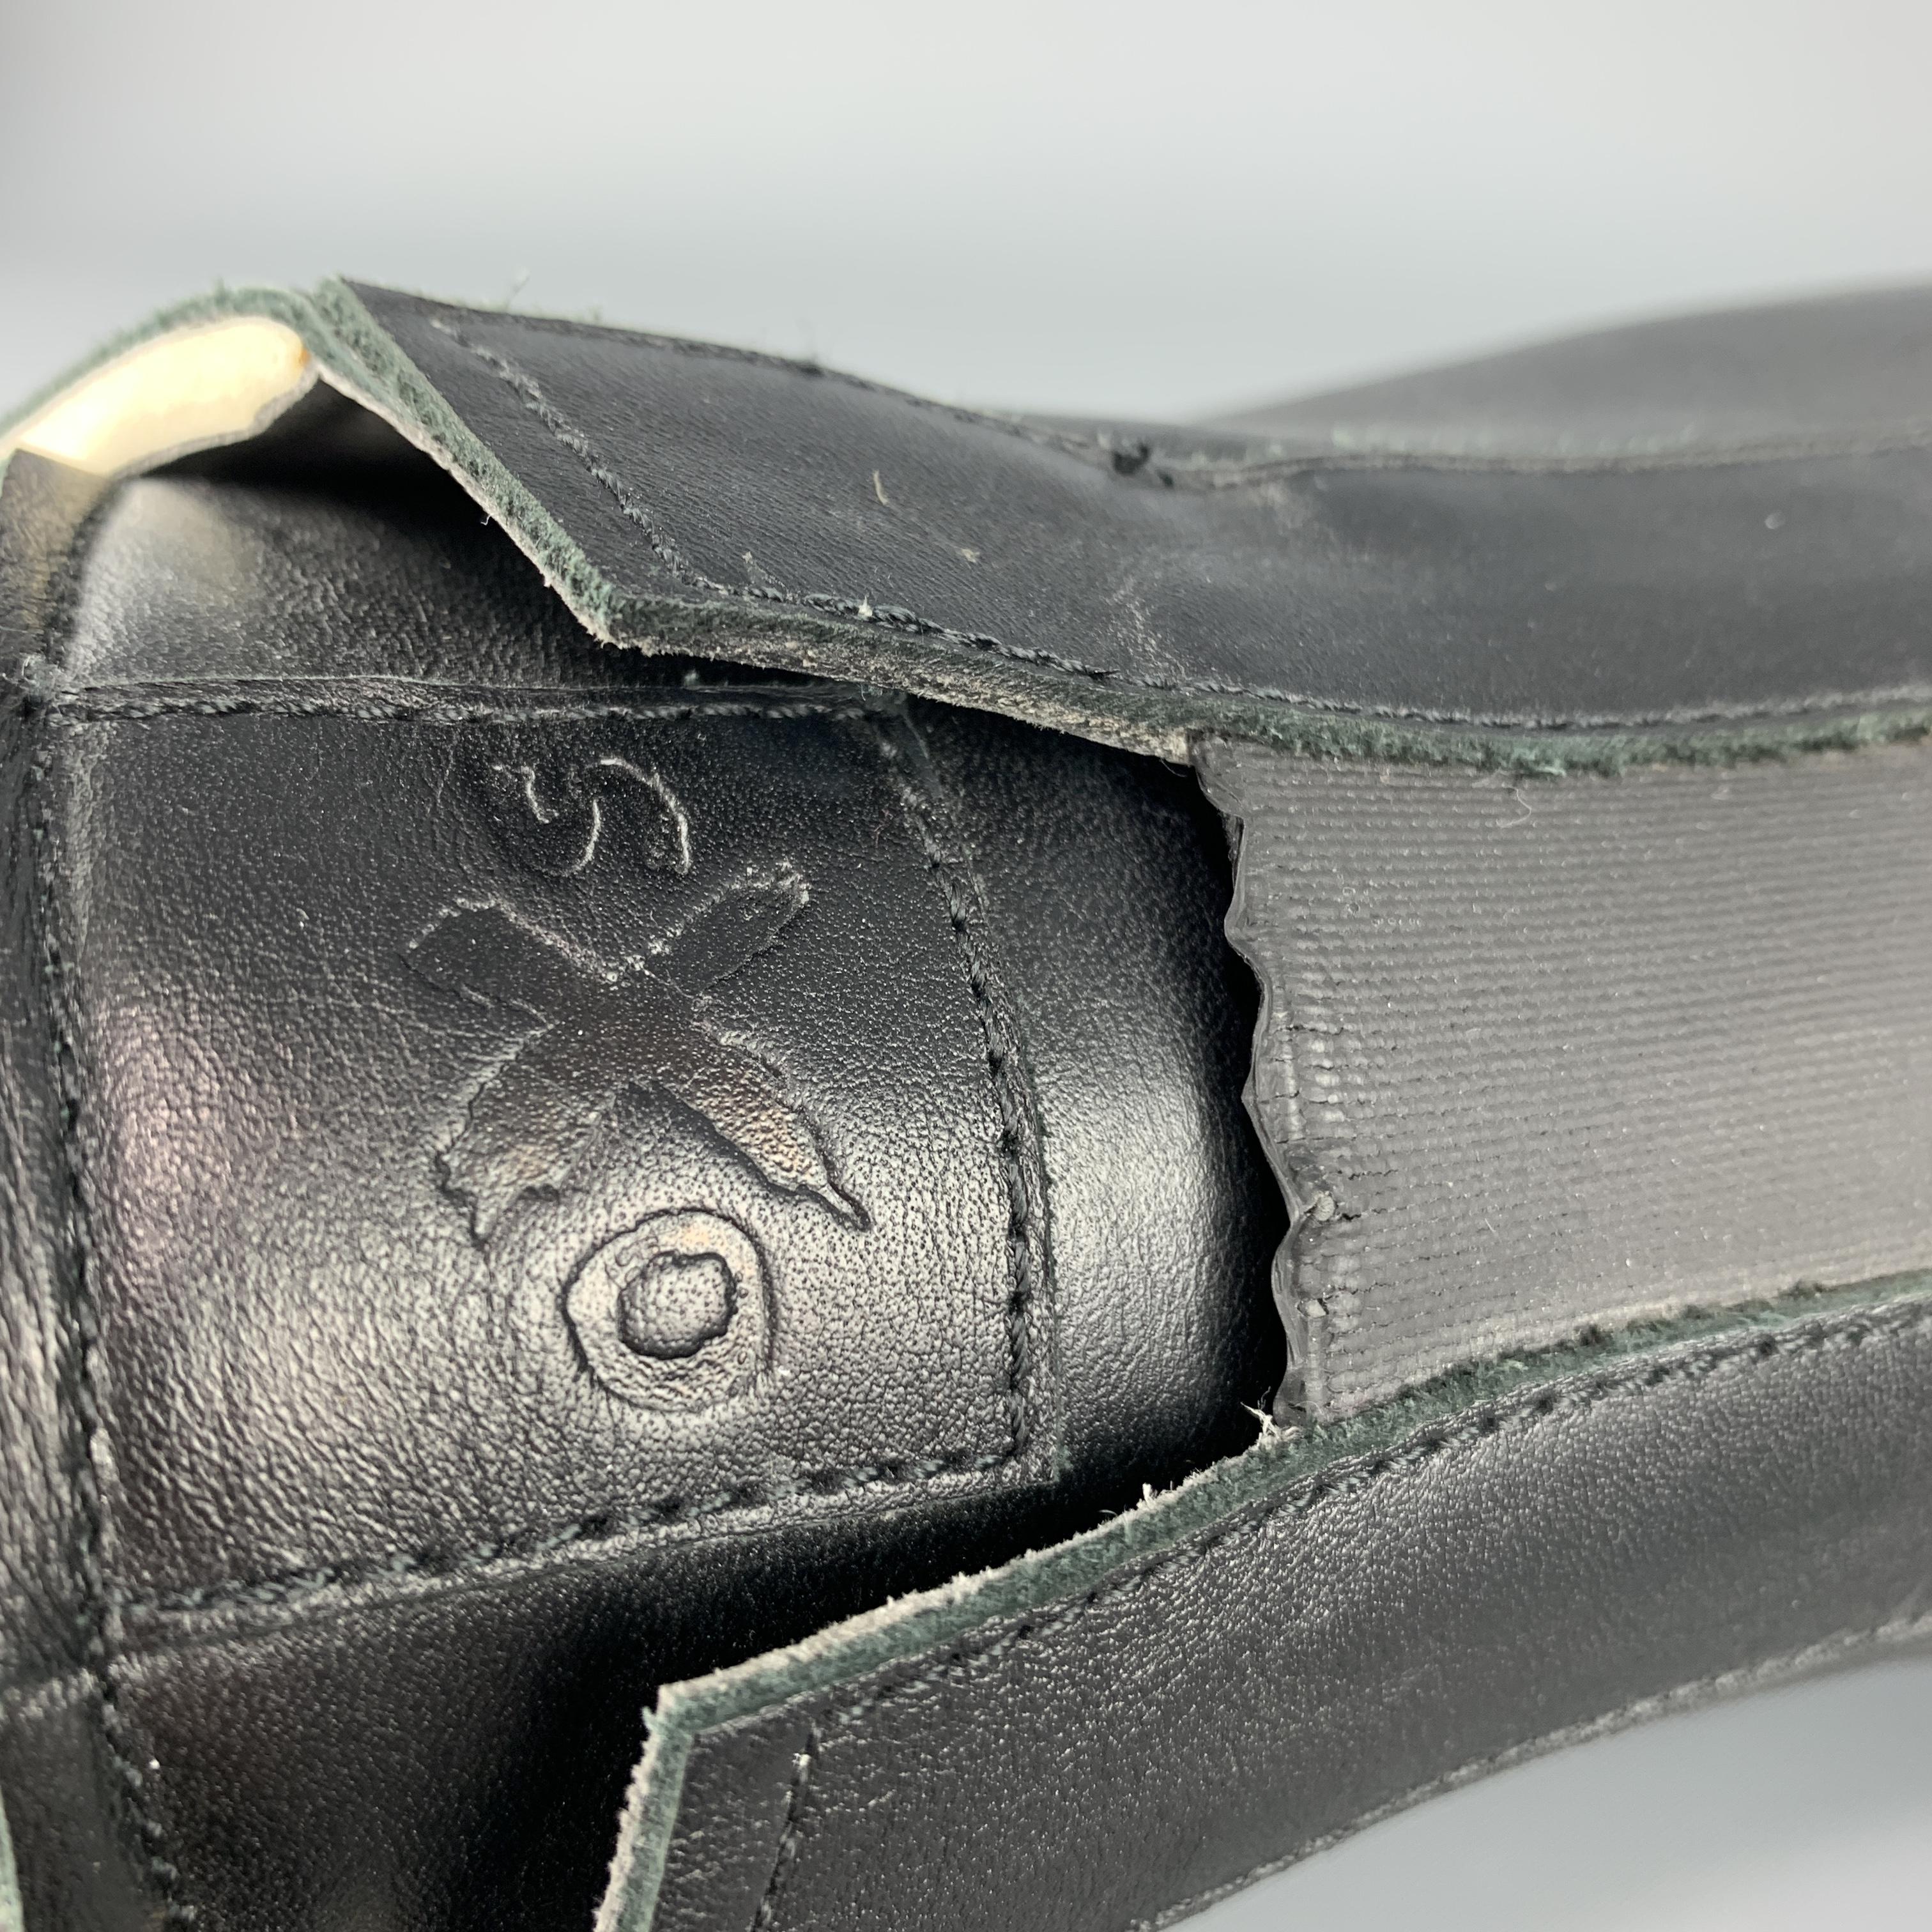 O.X.S. sneakers come ijn black leather with a slip on elastic front and dipped chunky rubber platform sole. Made in Italy.

Good Pre-Owned Condition.
Marked: IT 44

Outsole: 12 x 4 in.